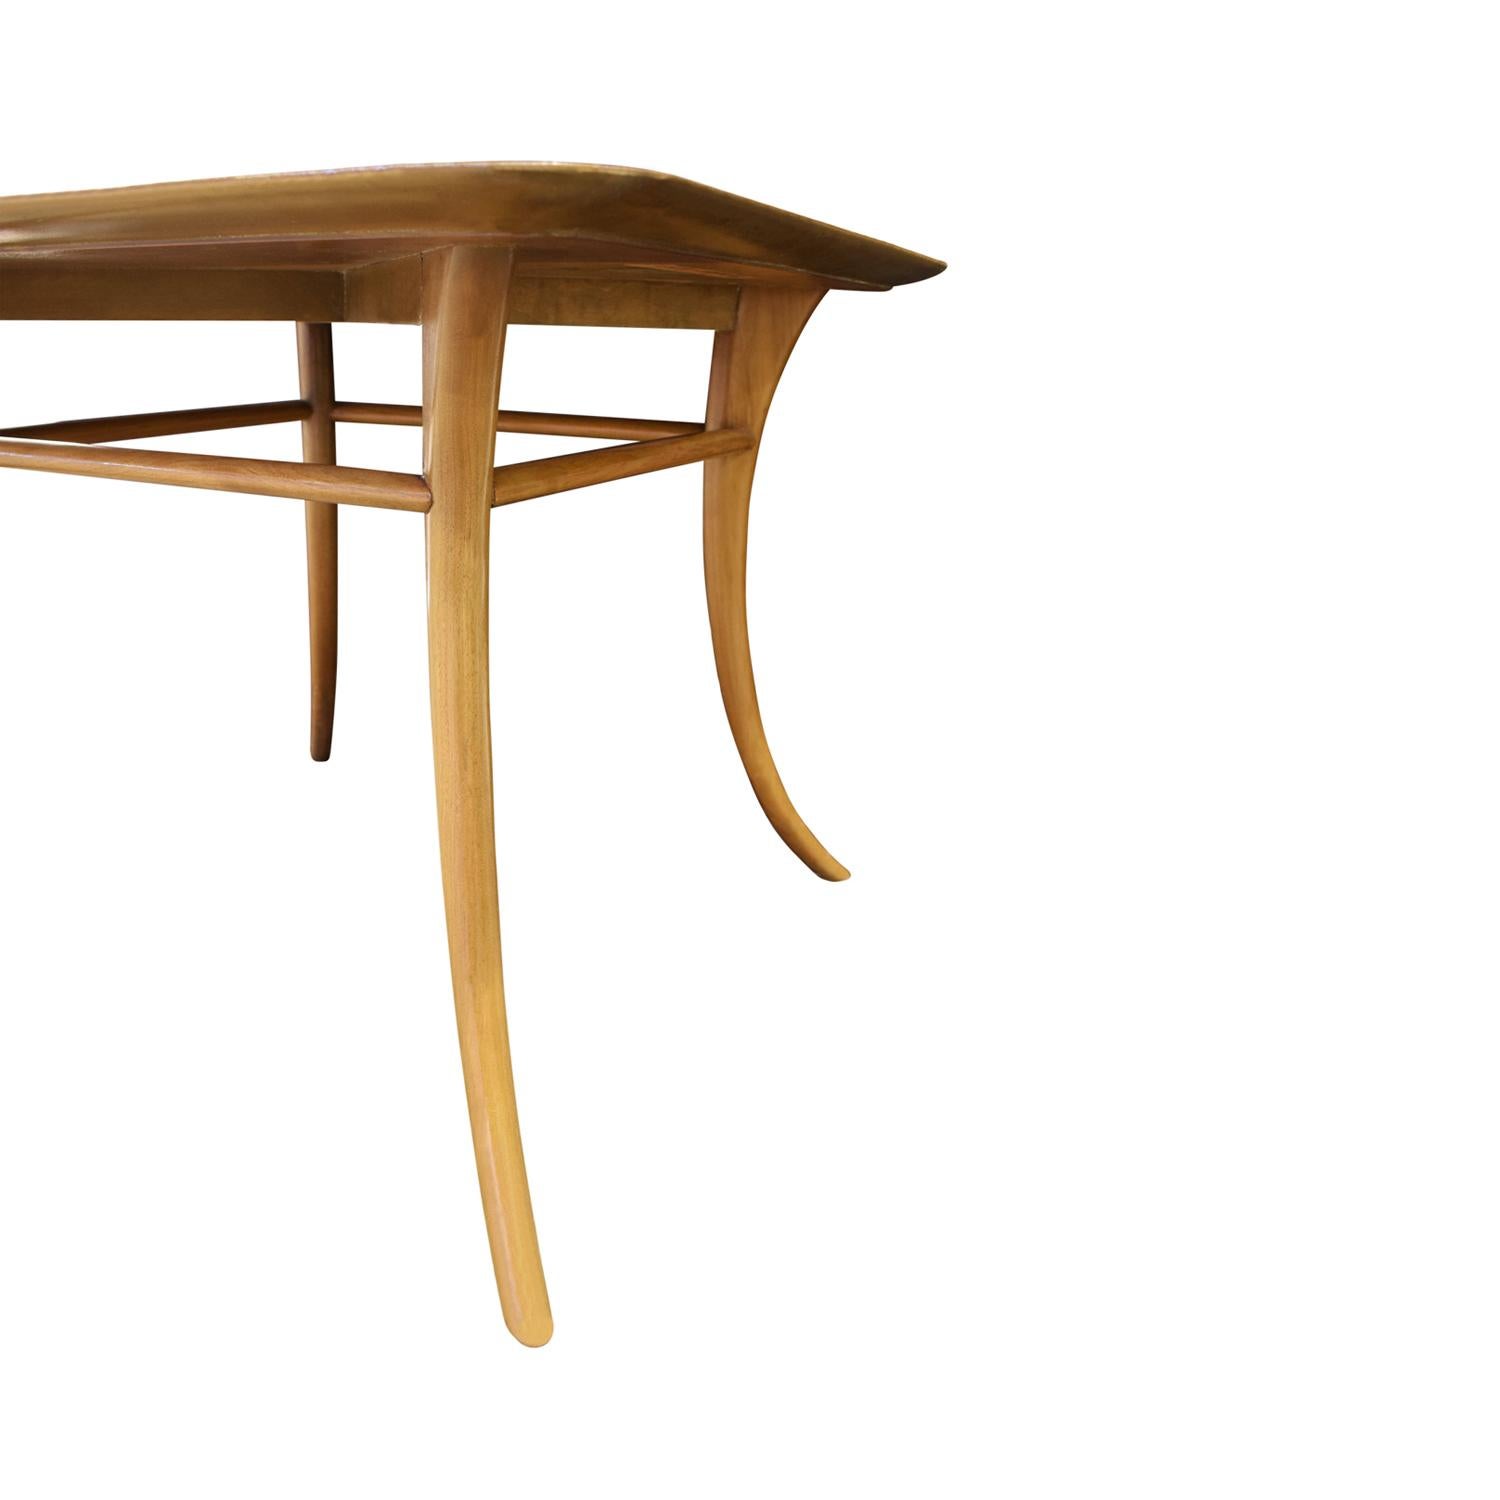 Hand-Crafted T.H. Robsjohn-Gibbings End Table in Walnut with Klismos Legs, 1956 'Signed' For Sale